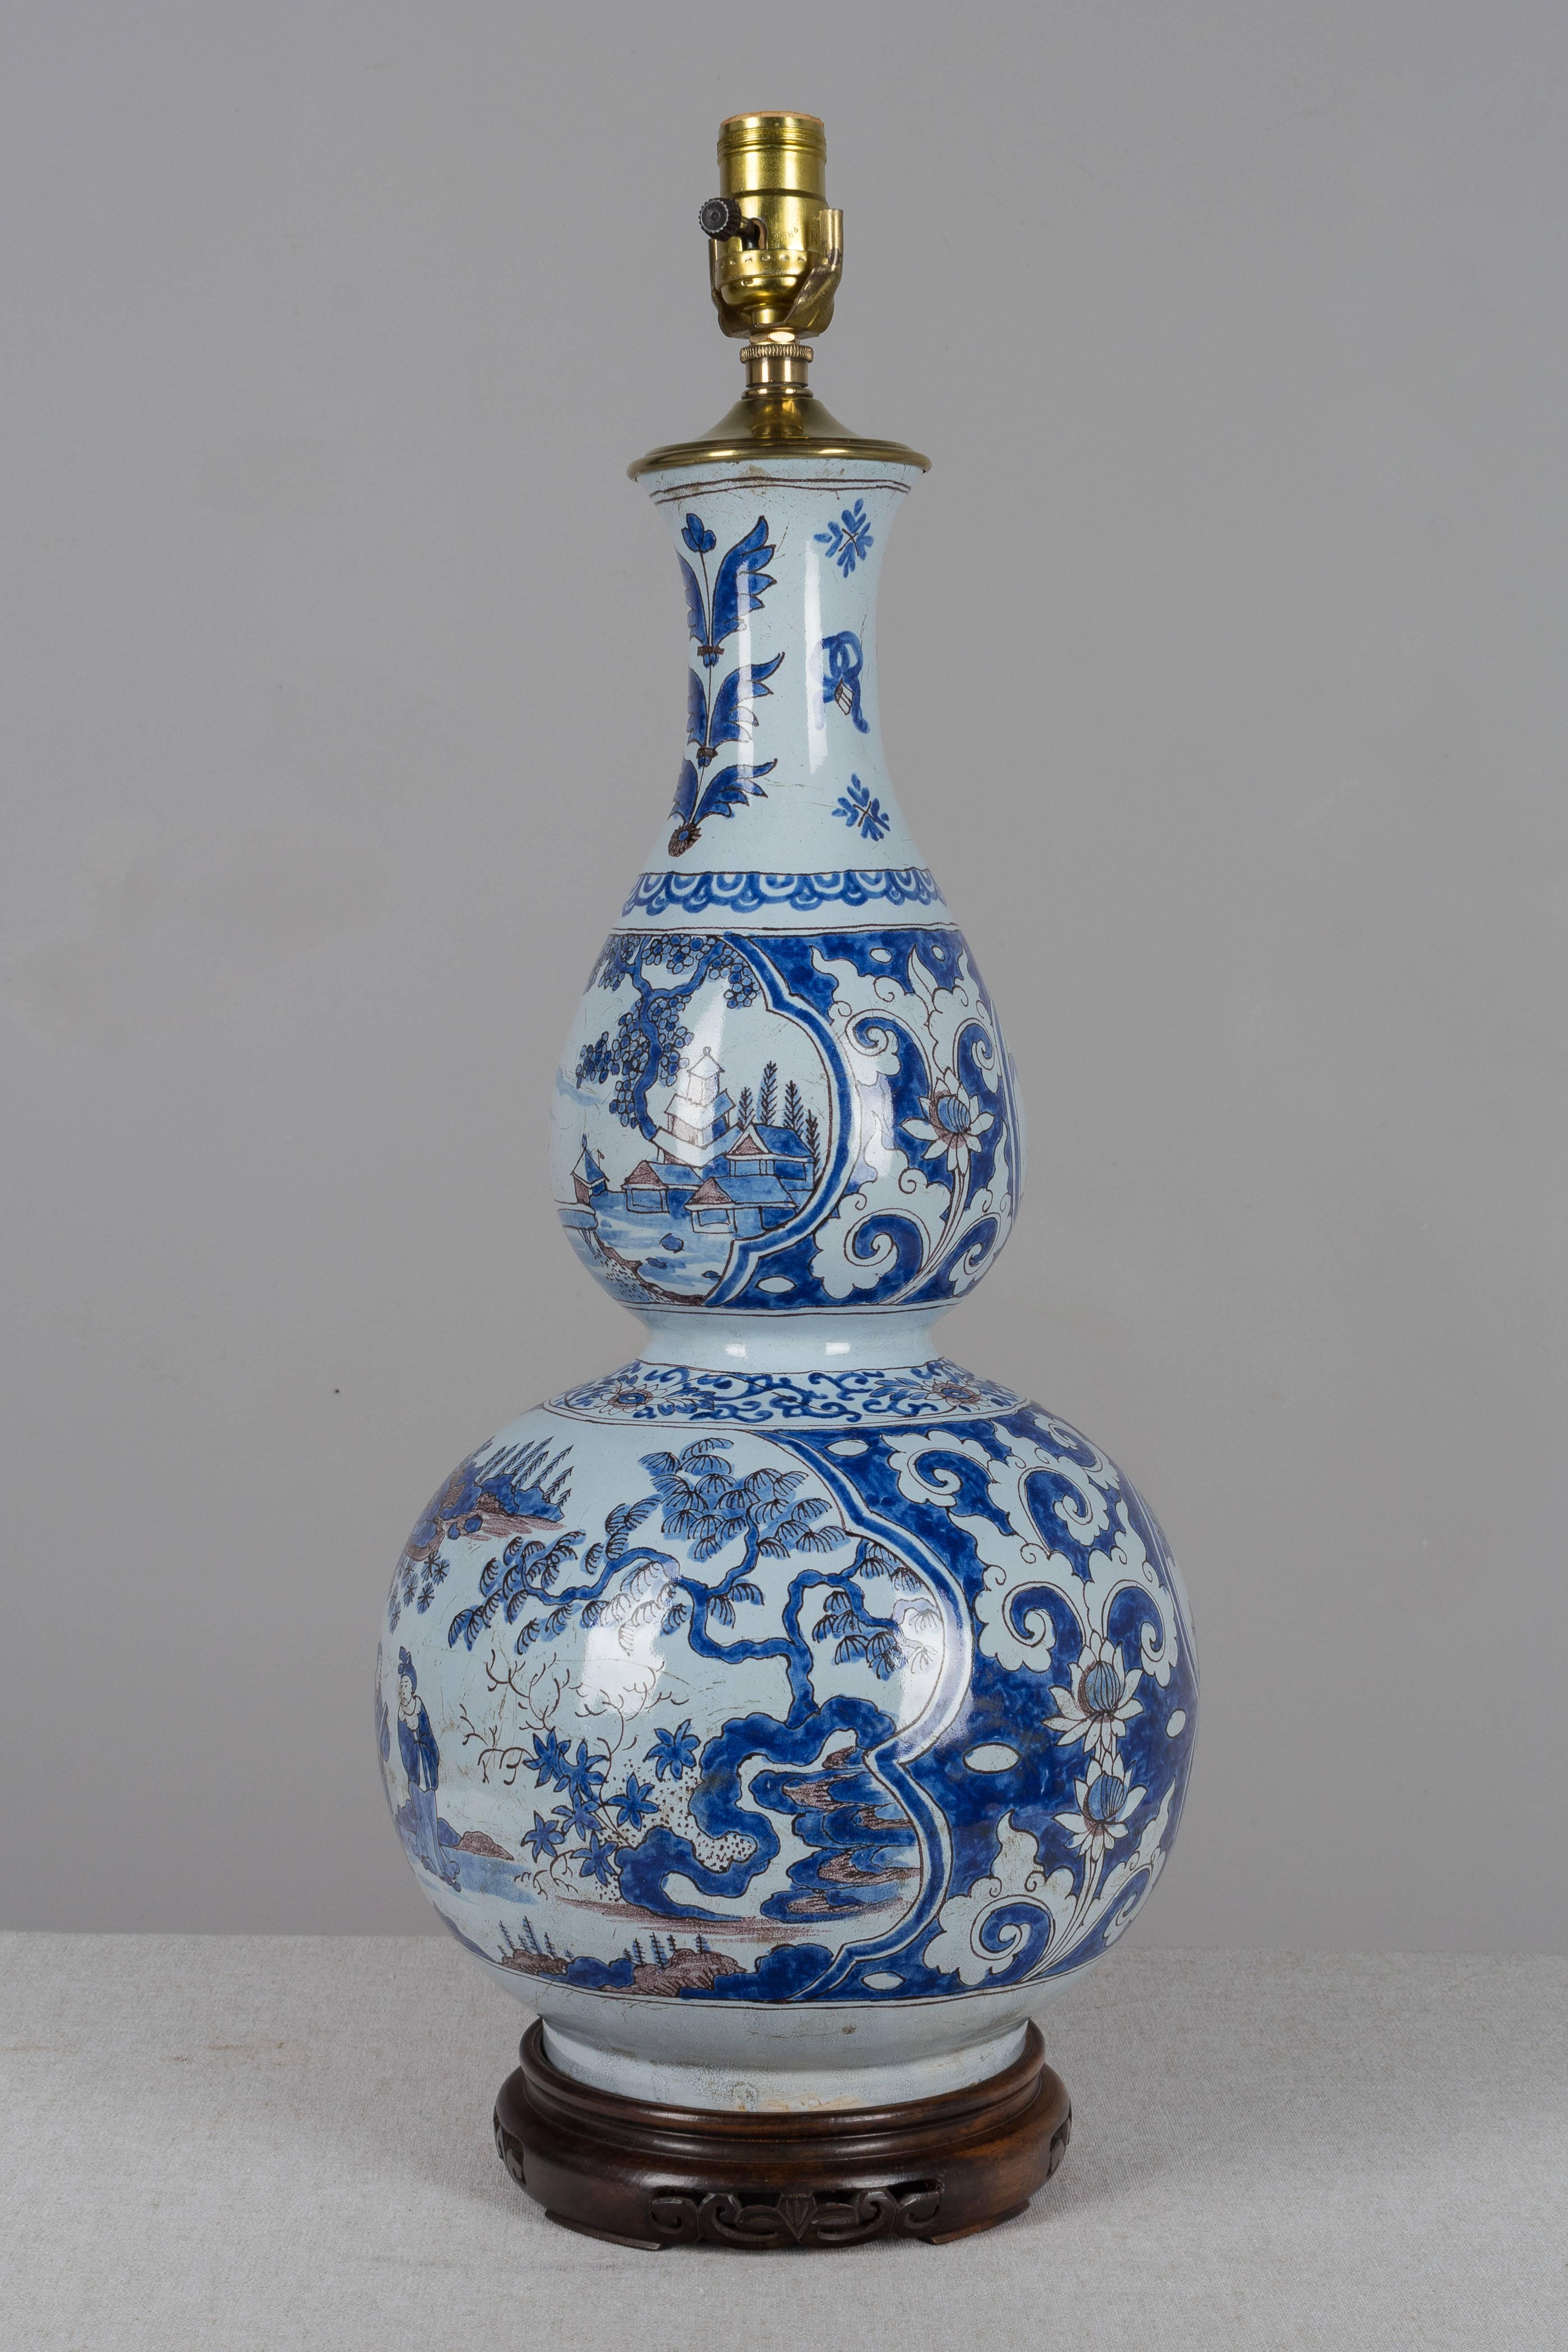 An 18th century delft faience double gourd form vase converted to a lamp. Hand-painted chinoiserie motif in indigo blue on pale blue ground. Vase is 19